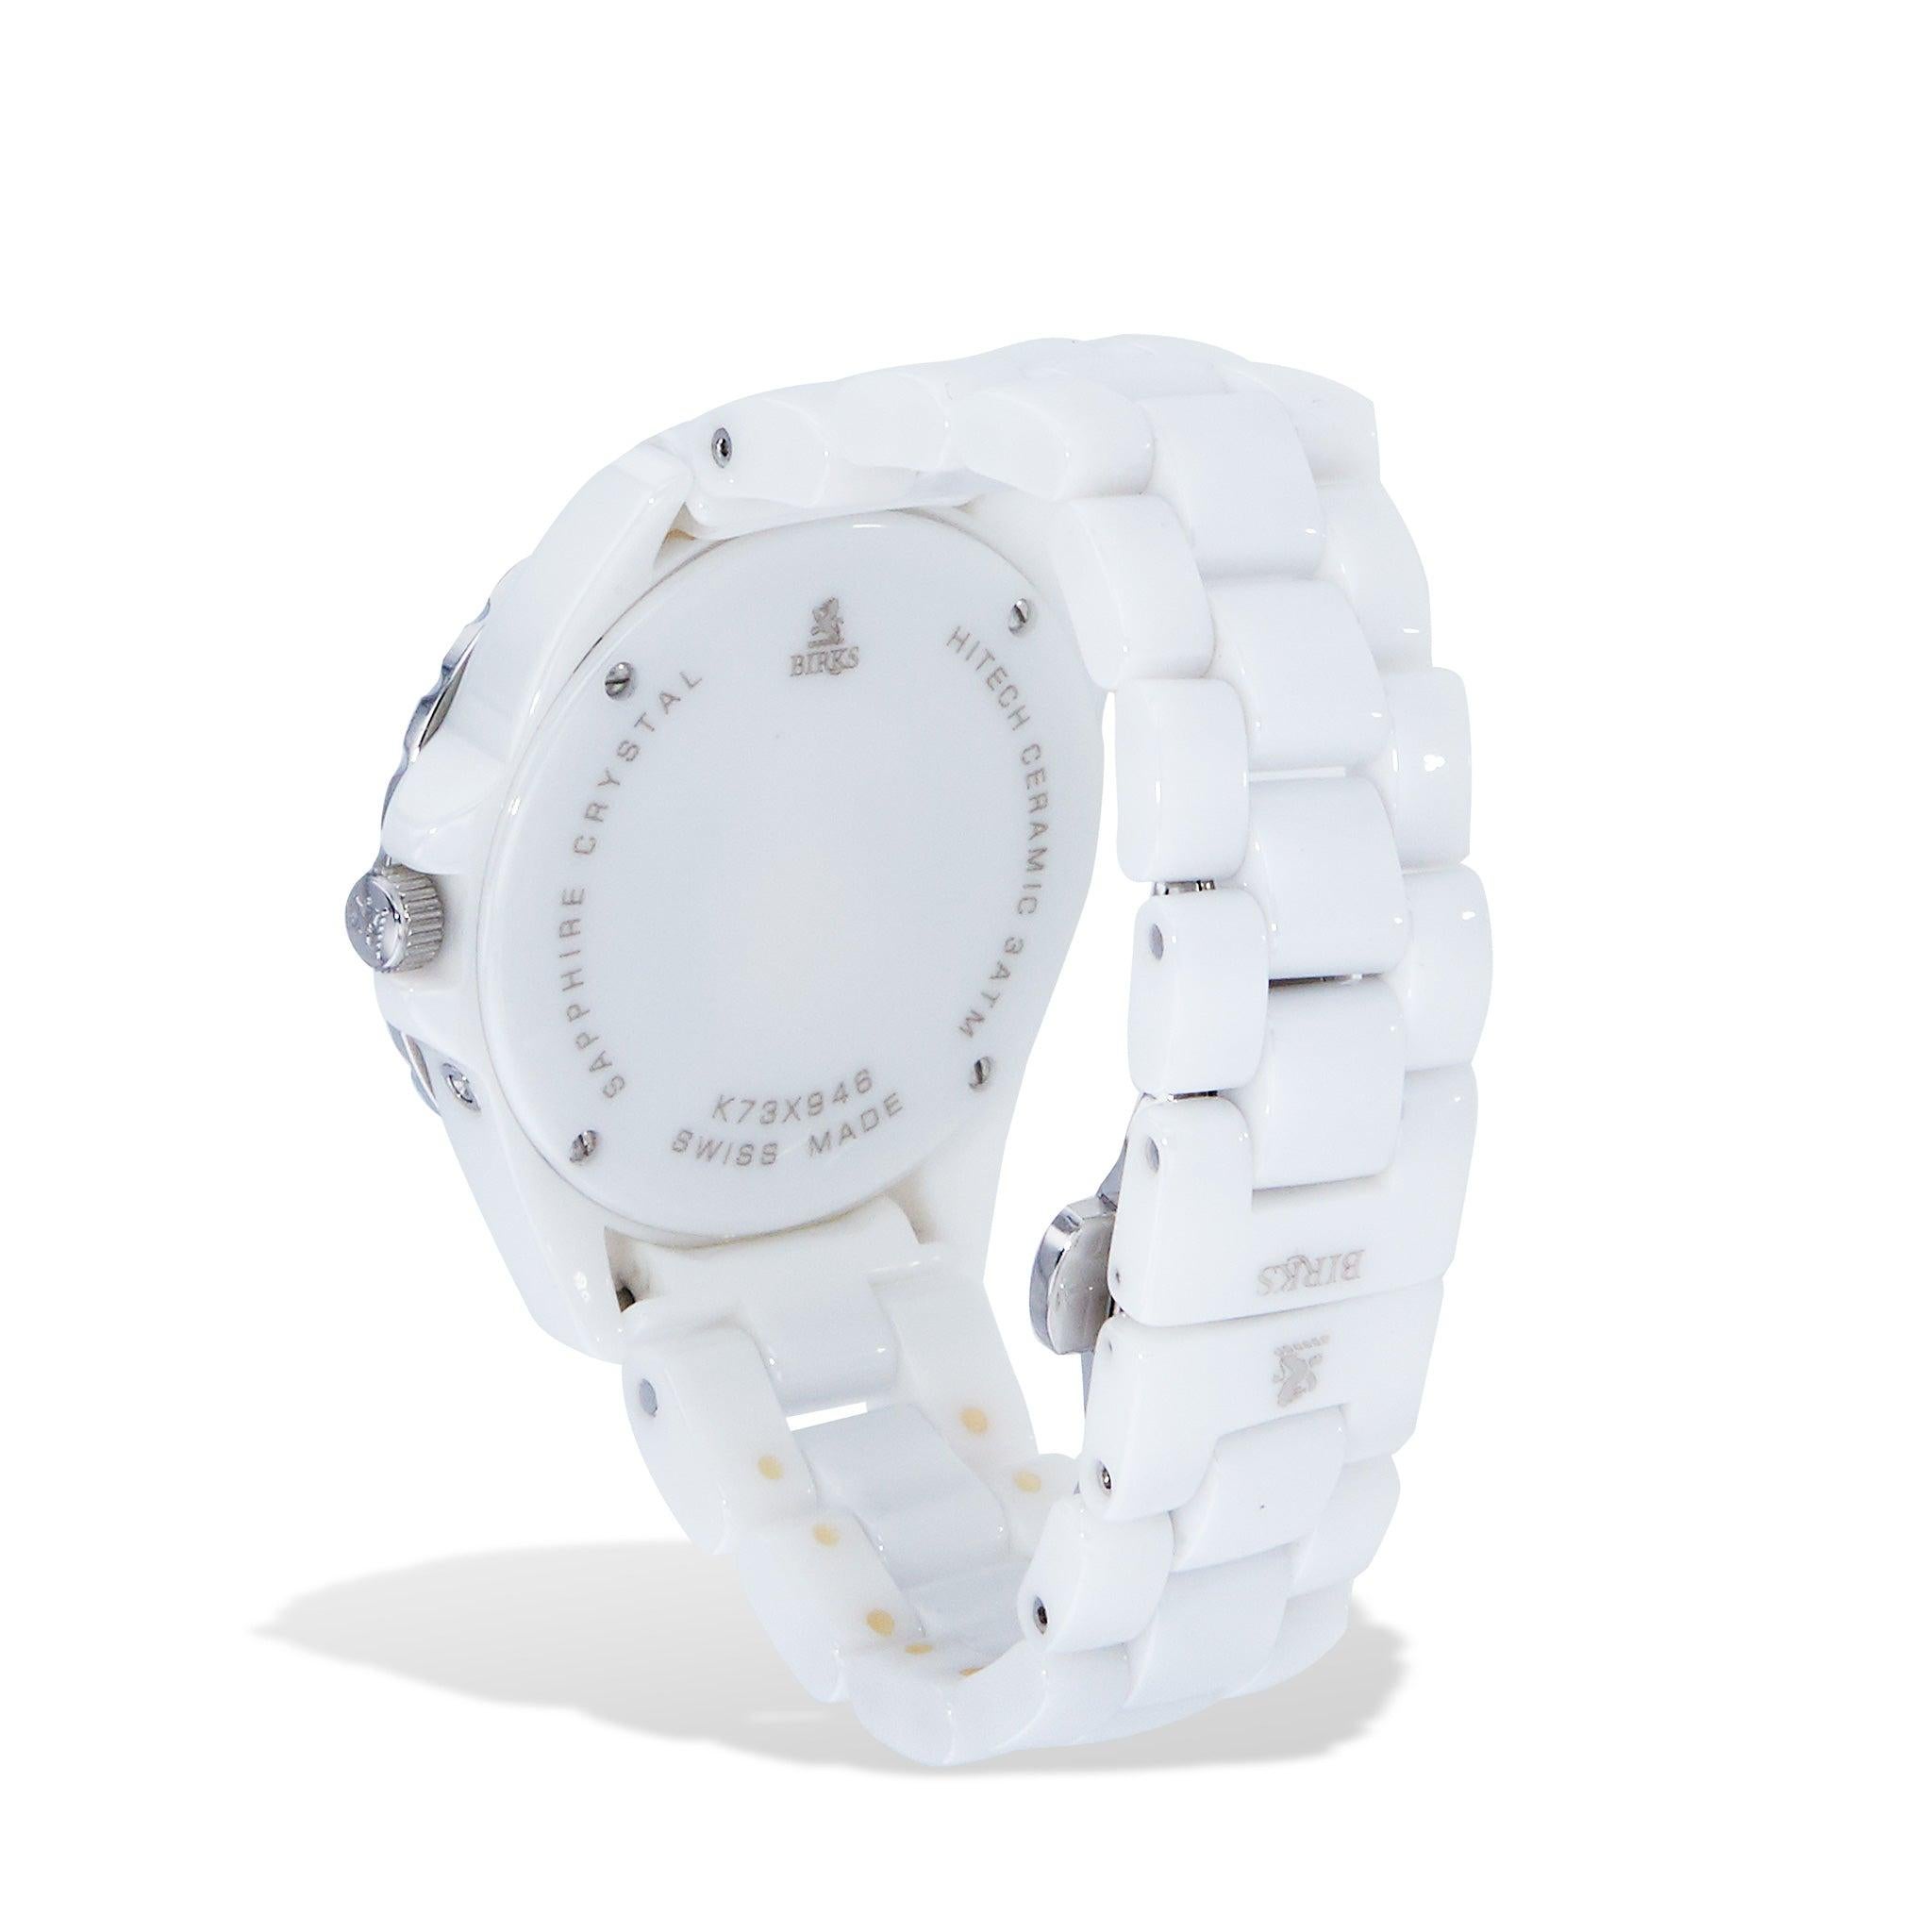 This sleek white ceramic Estate Birks Hi Tech watch combines luxurious style and modern technology, featuring a diamond-accented mother of pearl dial and quartz movement. Put a unique twist on your looks with this watch, perfect for both casual and